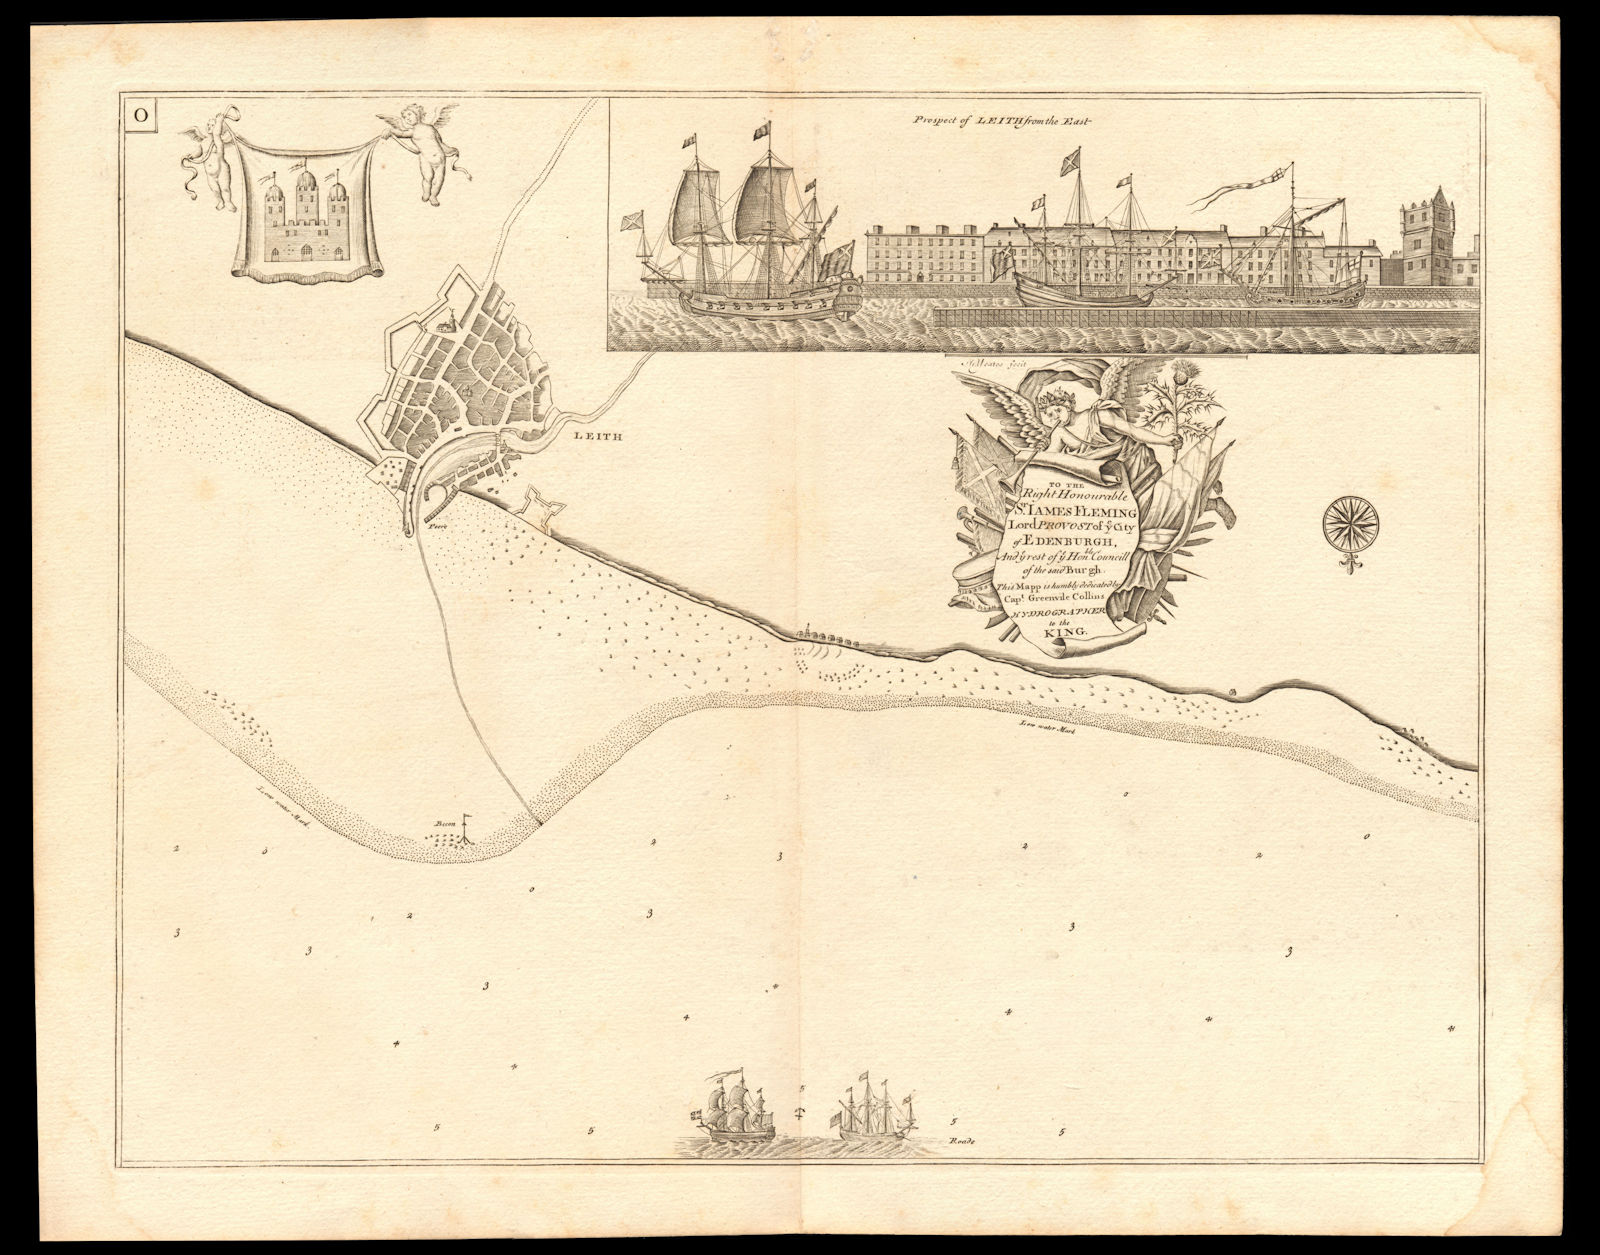 Navigation chart & view of LEITH, by Capt Greenvile COLLINS. Edinburgh c1774 map